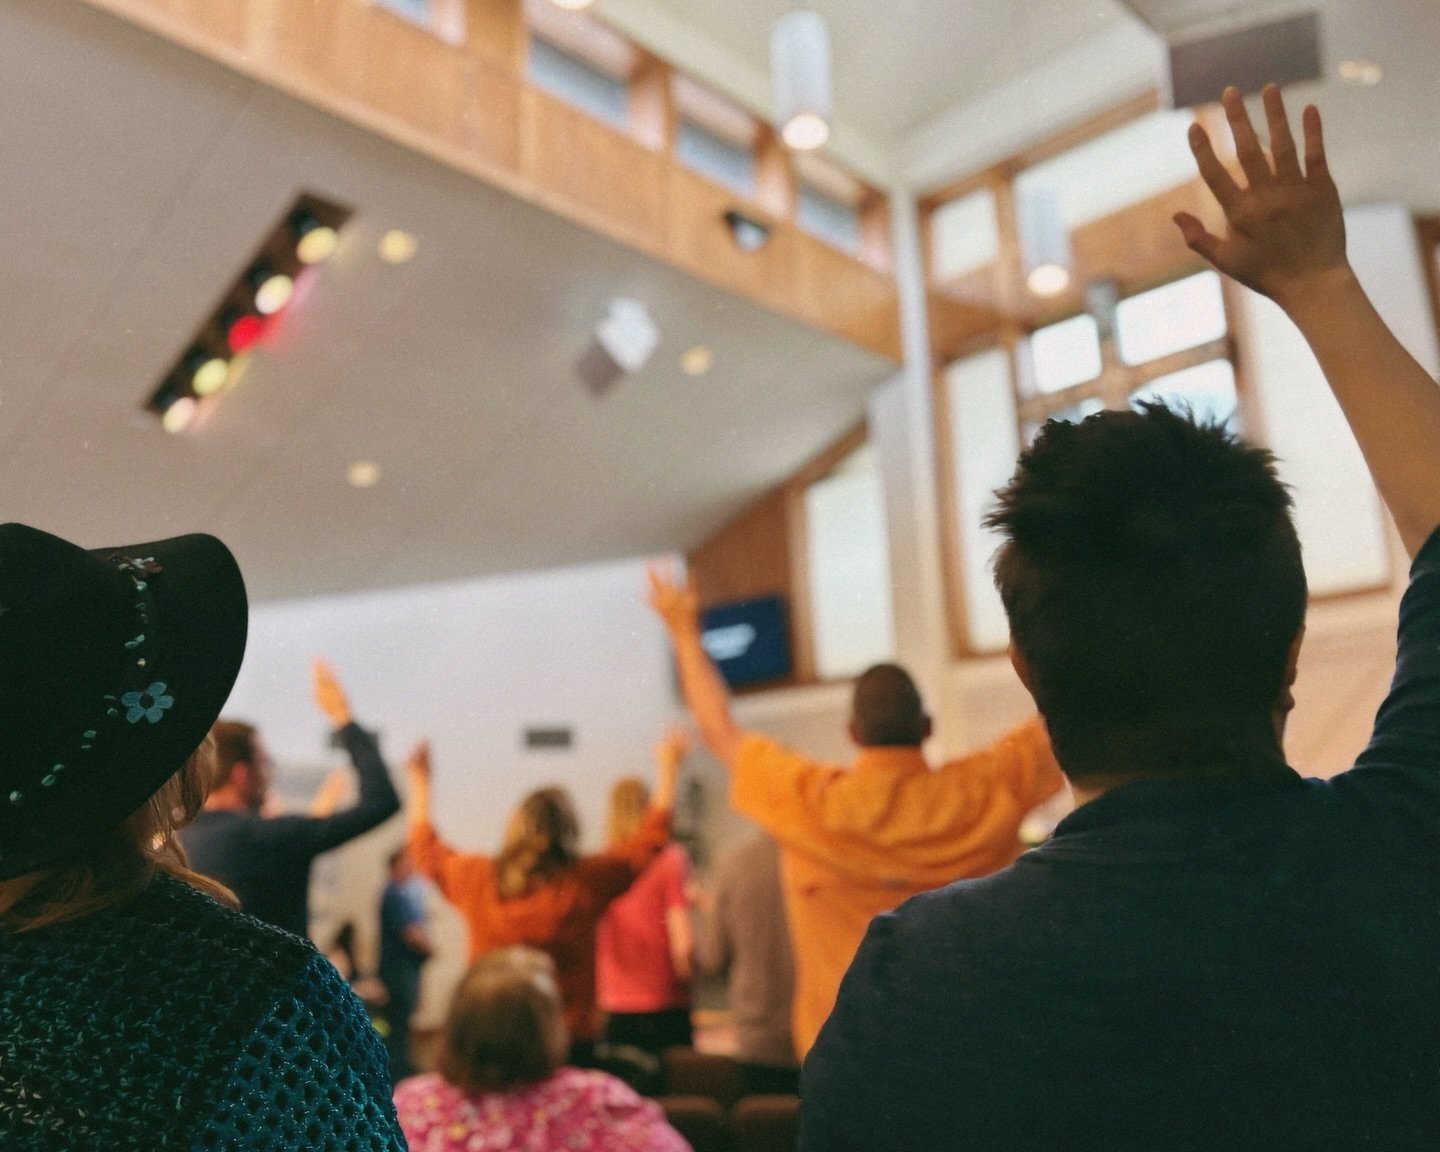 -
praise the Father
praise the Son
praise the Spirit, three in one
God of glory, Majesty
praise forever to the King of Kings.
-
#vineyardgrafton #lovegodloveothersperiod